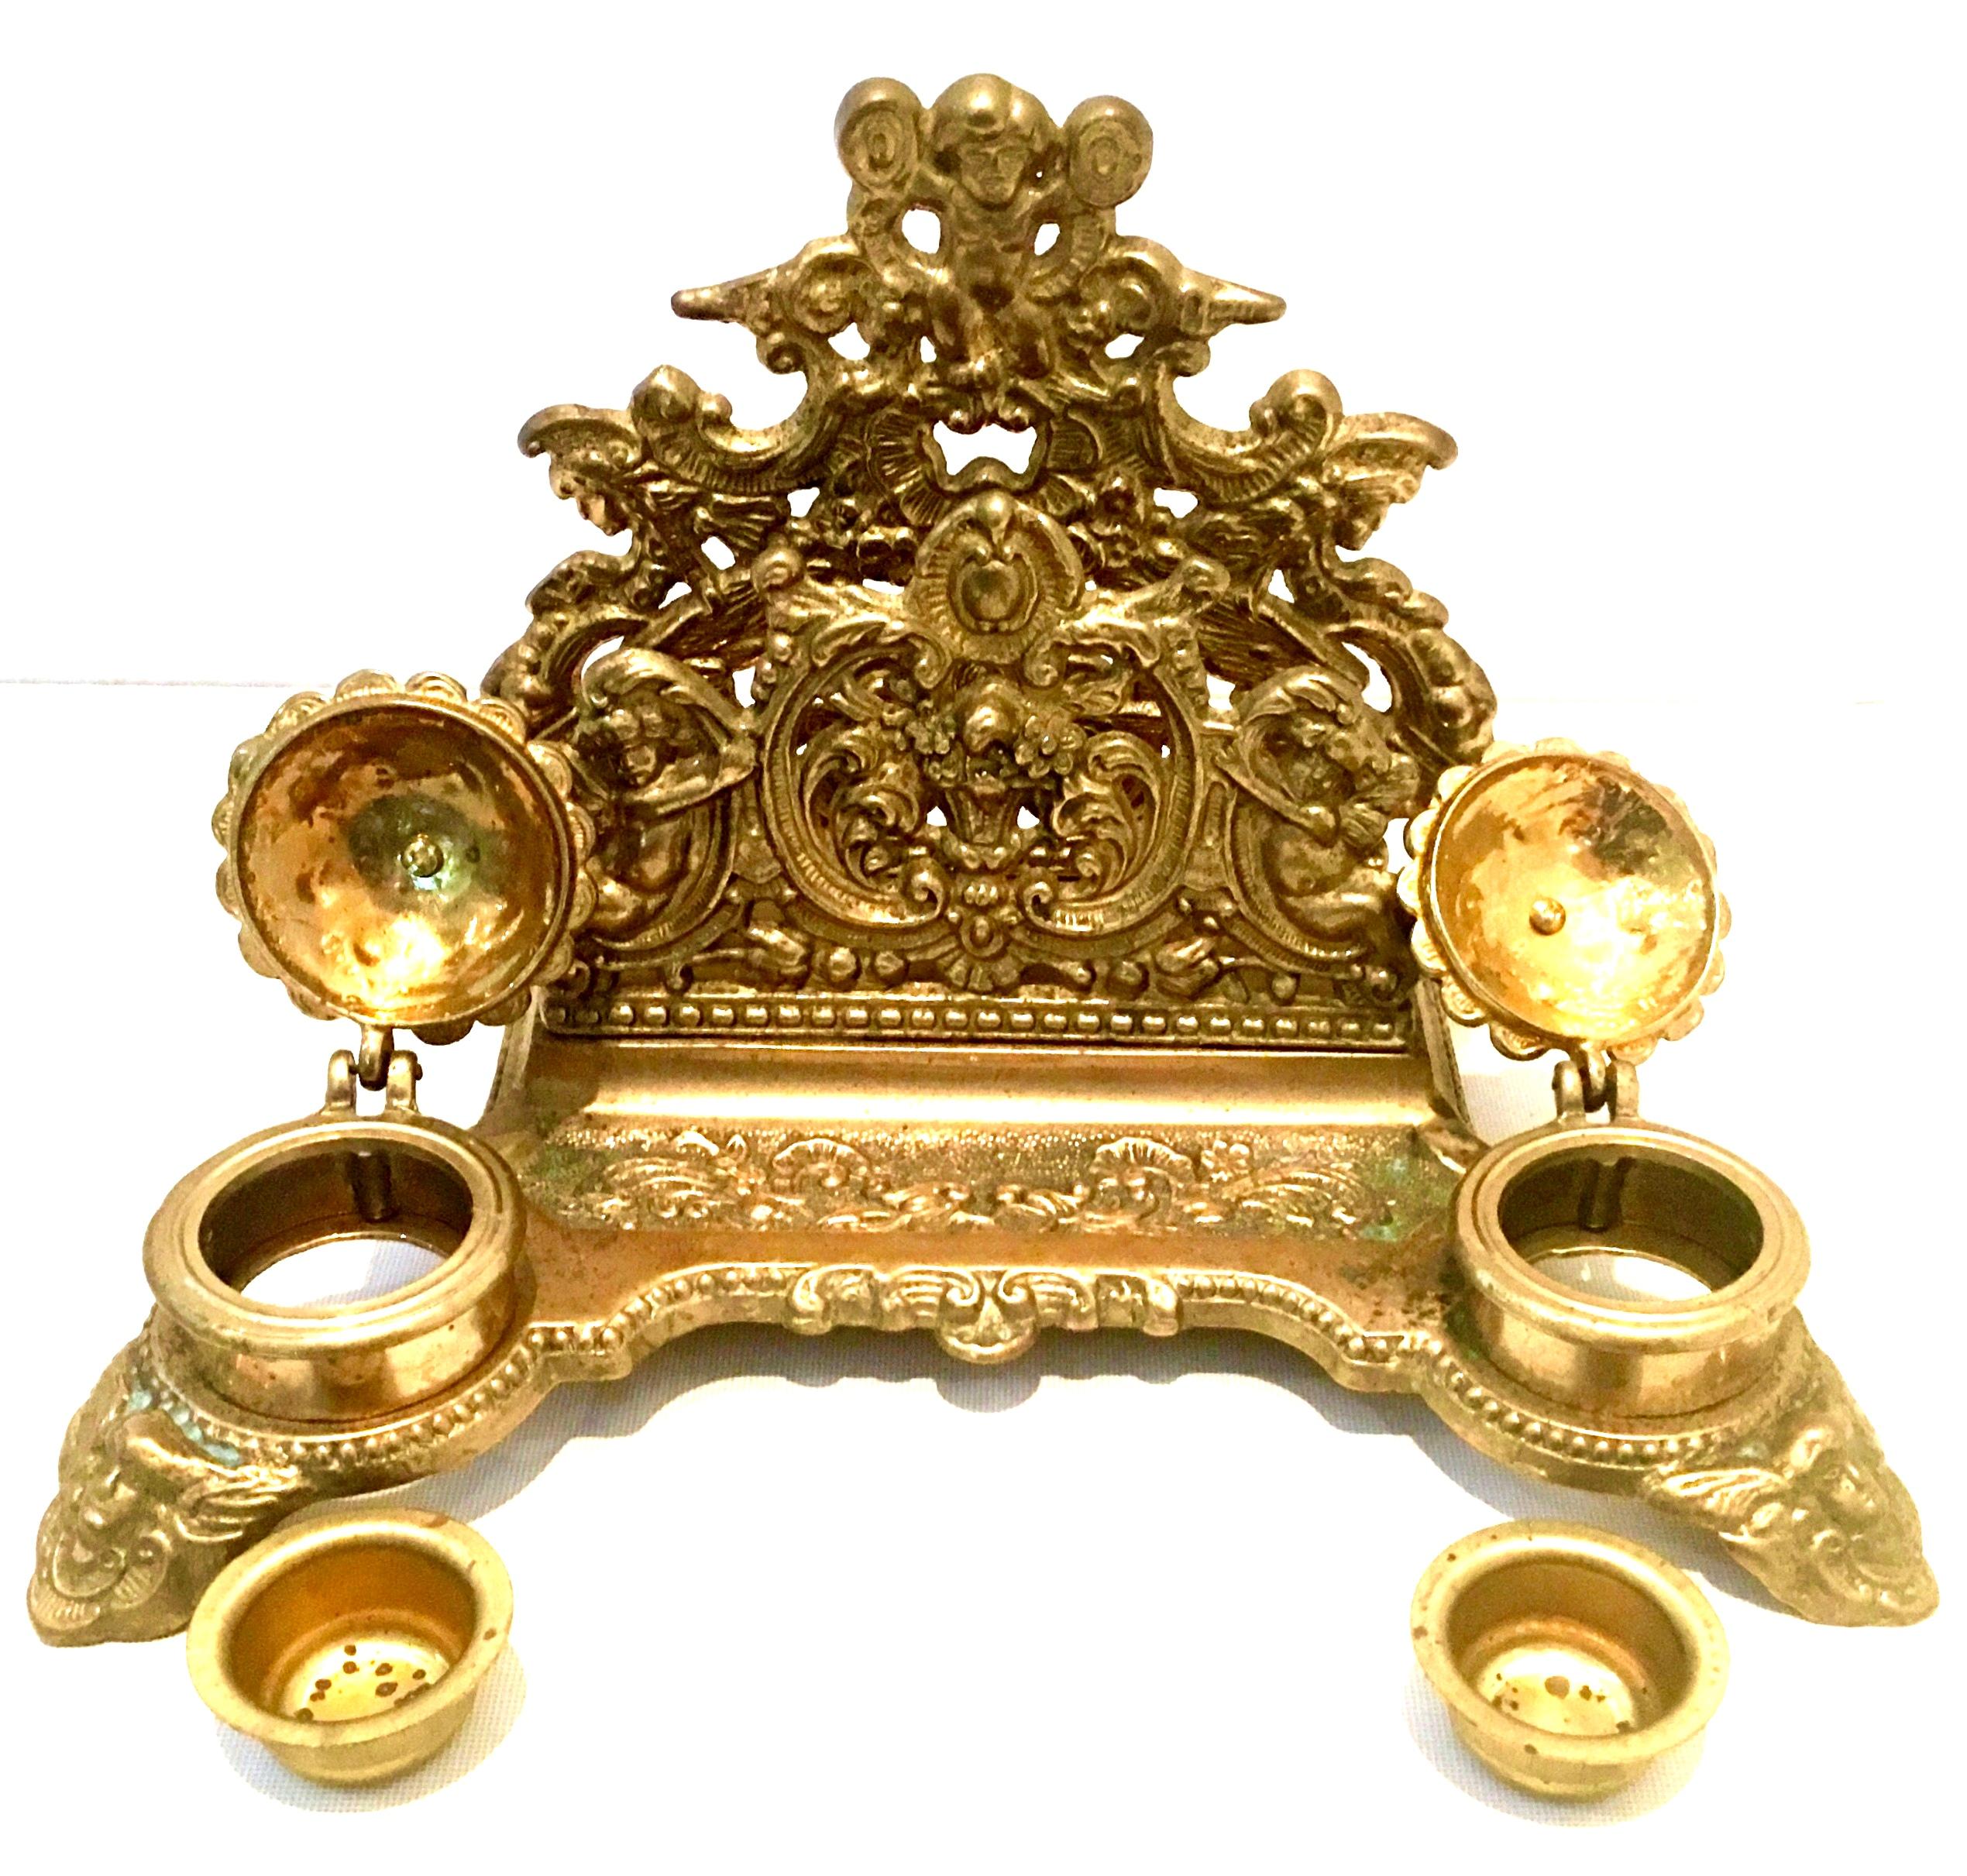 Antique English gilt gold brass letter holder and double inkwell desk set. Finely crafted of carved and etched gold gilt solid brass with intricate and high relief motif of scrolls, floral, foliate and putti. Footed with a pen tray and pierced cast